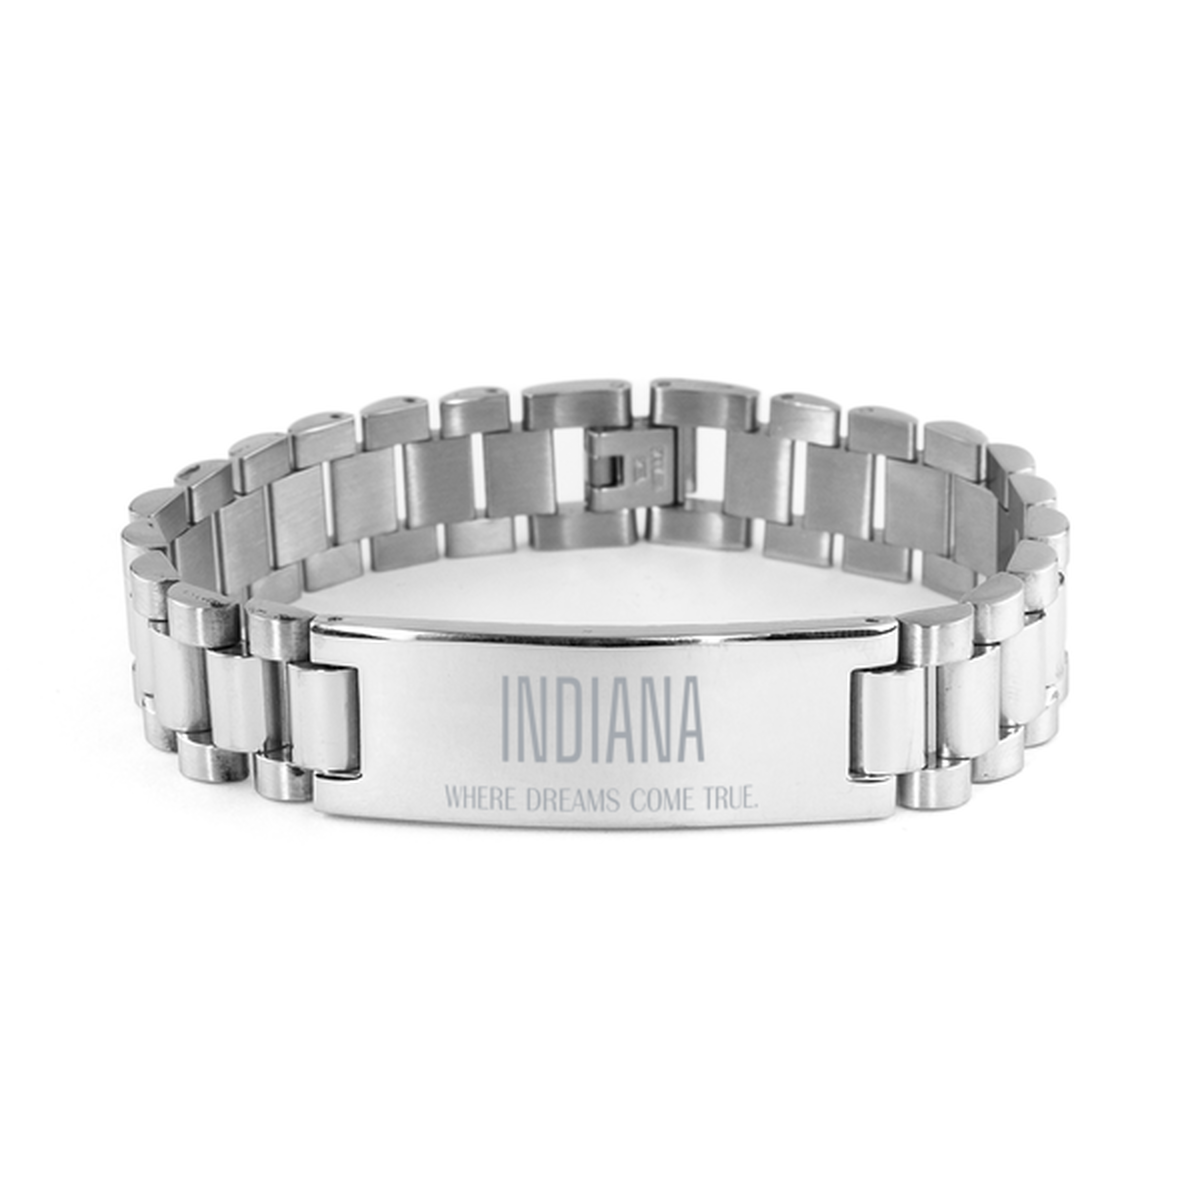 Love Indiana State Ladder Stainless Steel Bracelet, Indiana Where dreams come true, Birthday Inspirational Gifts For Indiana Men, Women, Friends